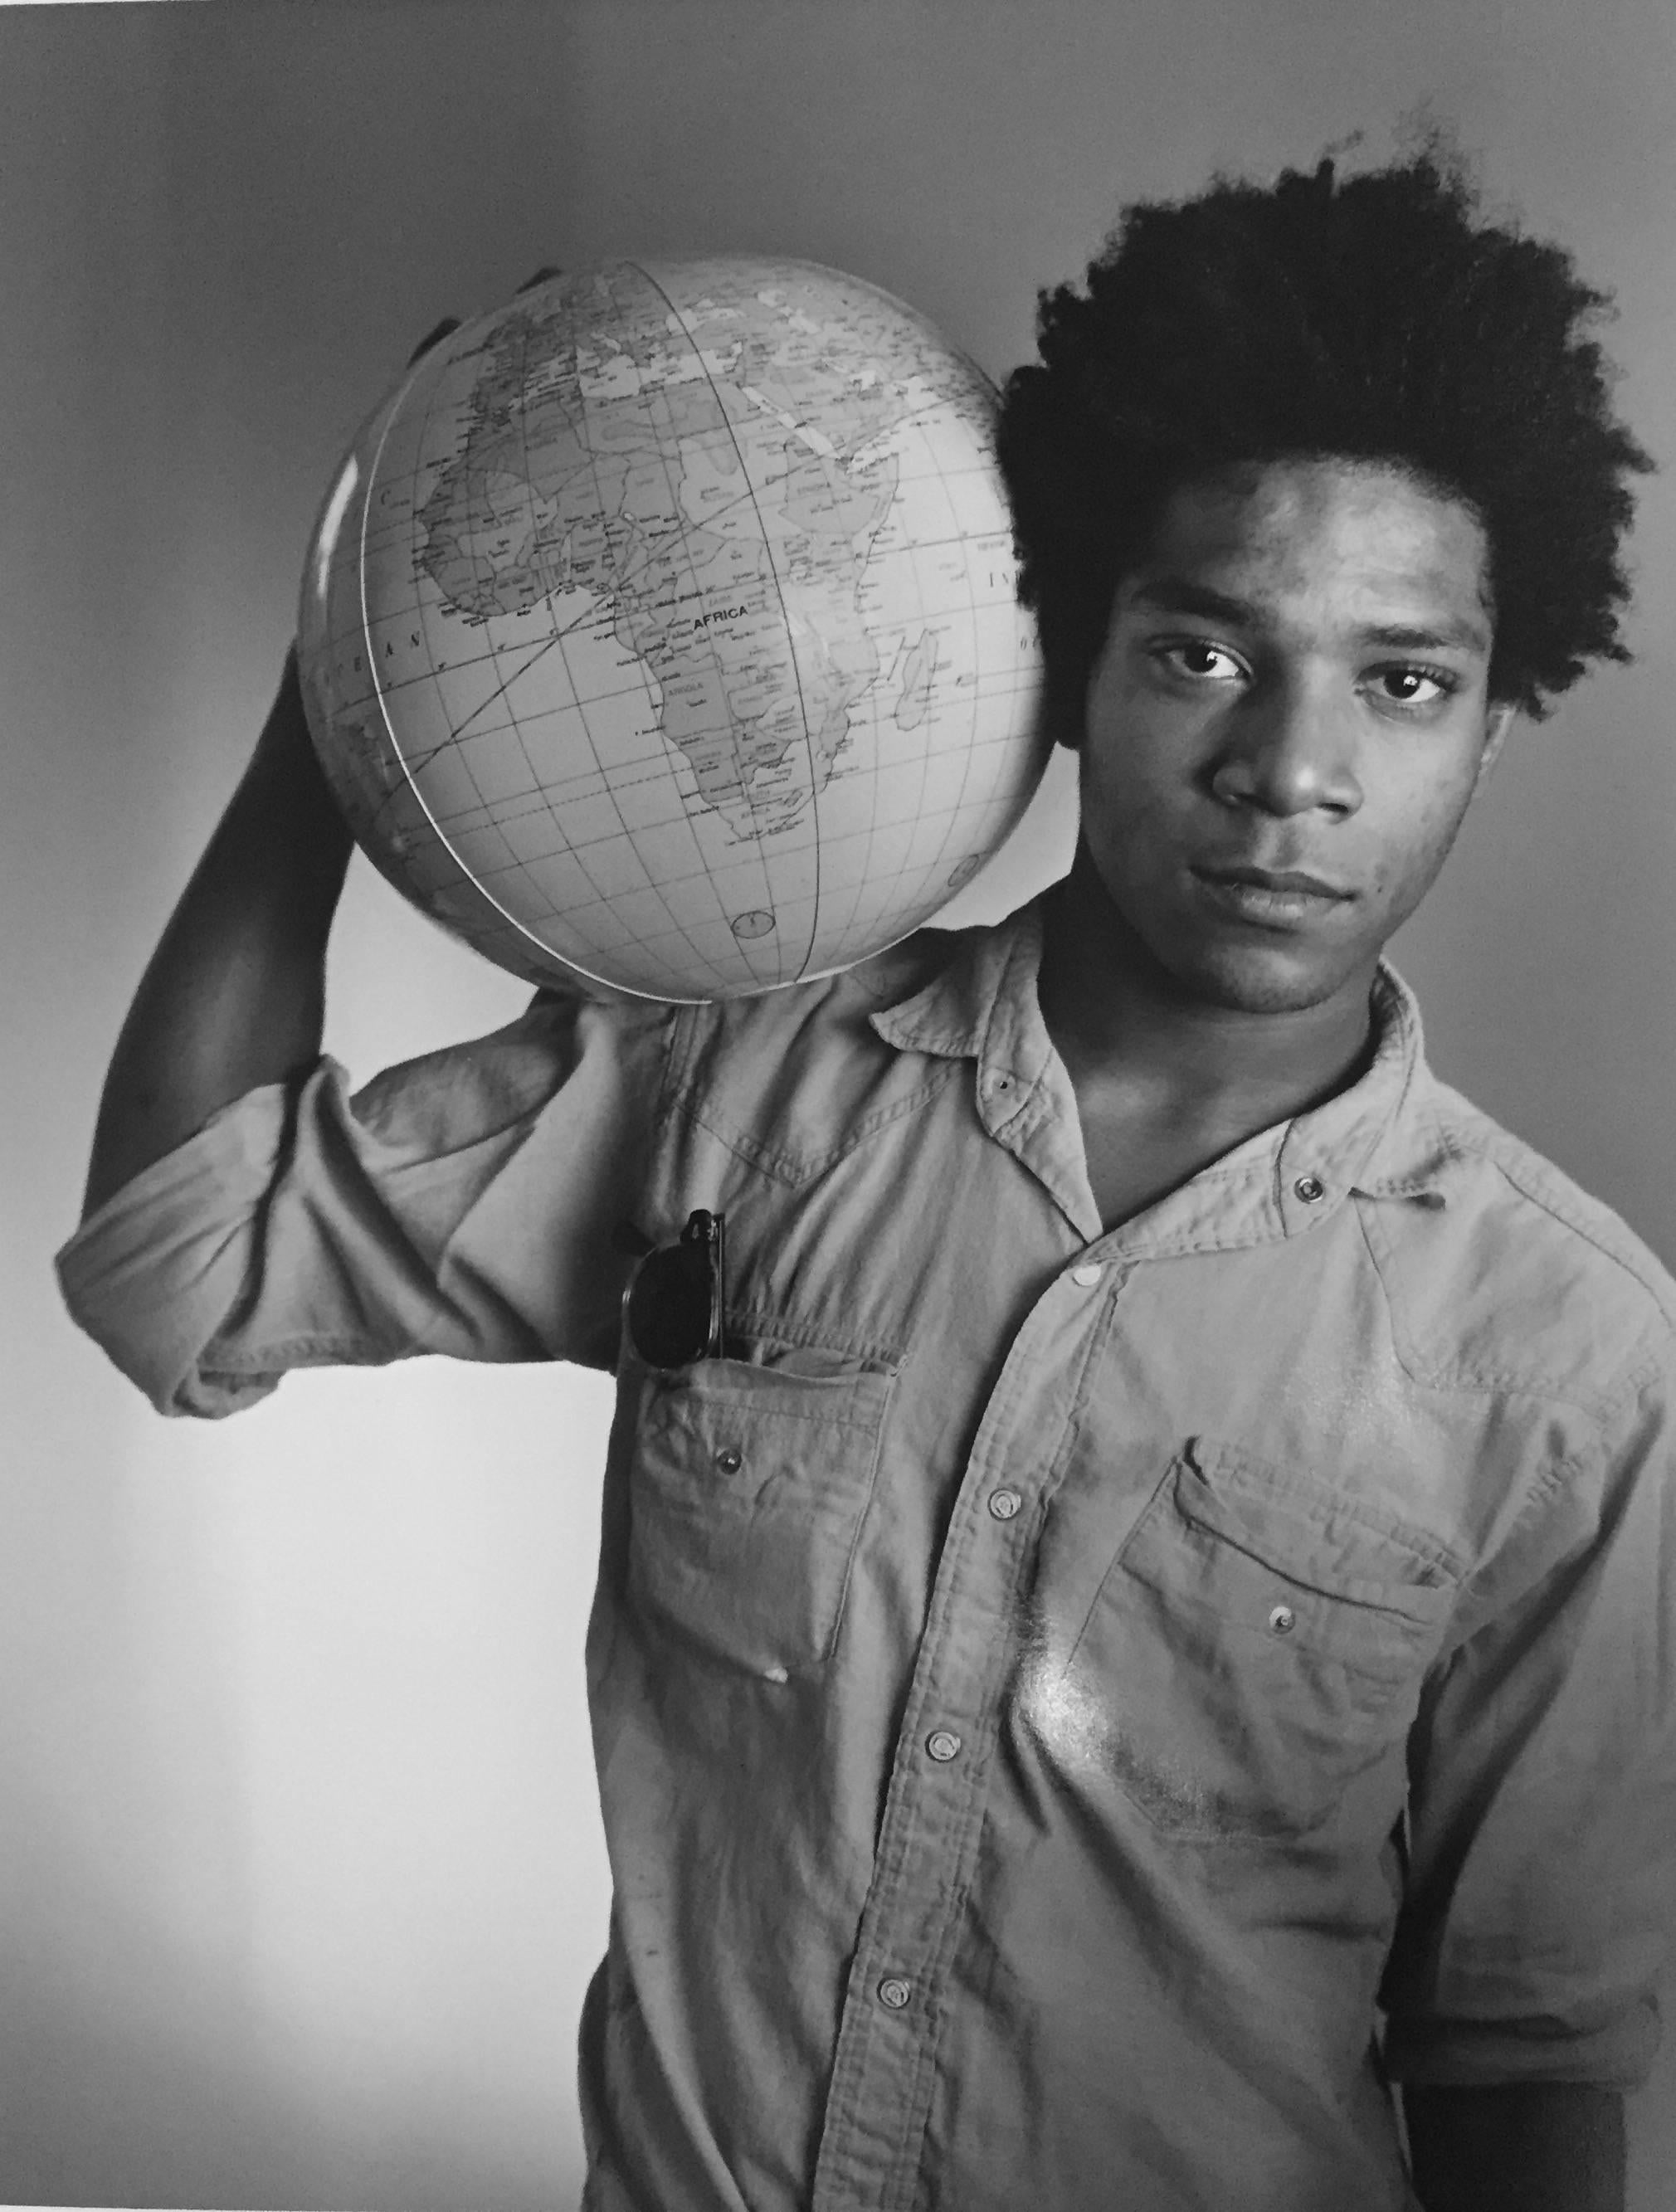 Untitled (Basquiat with Globe), c. 1985 Edition of 250 - Photograph by Christopher Makos